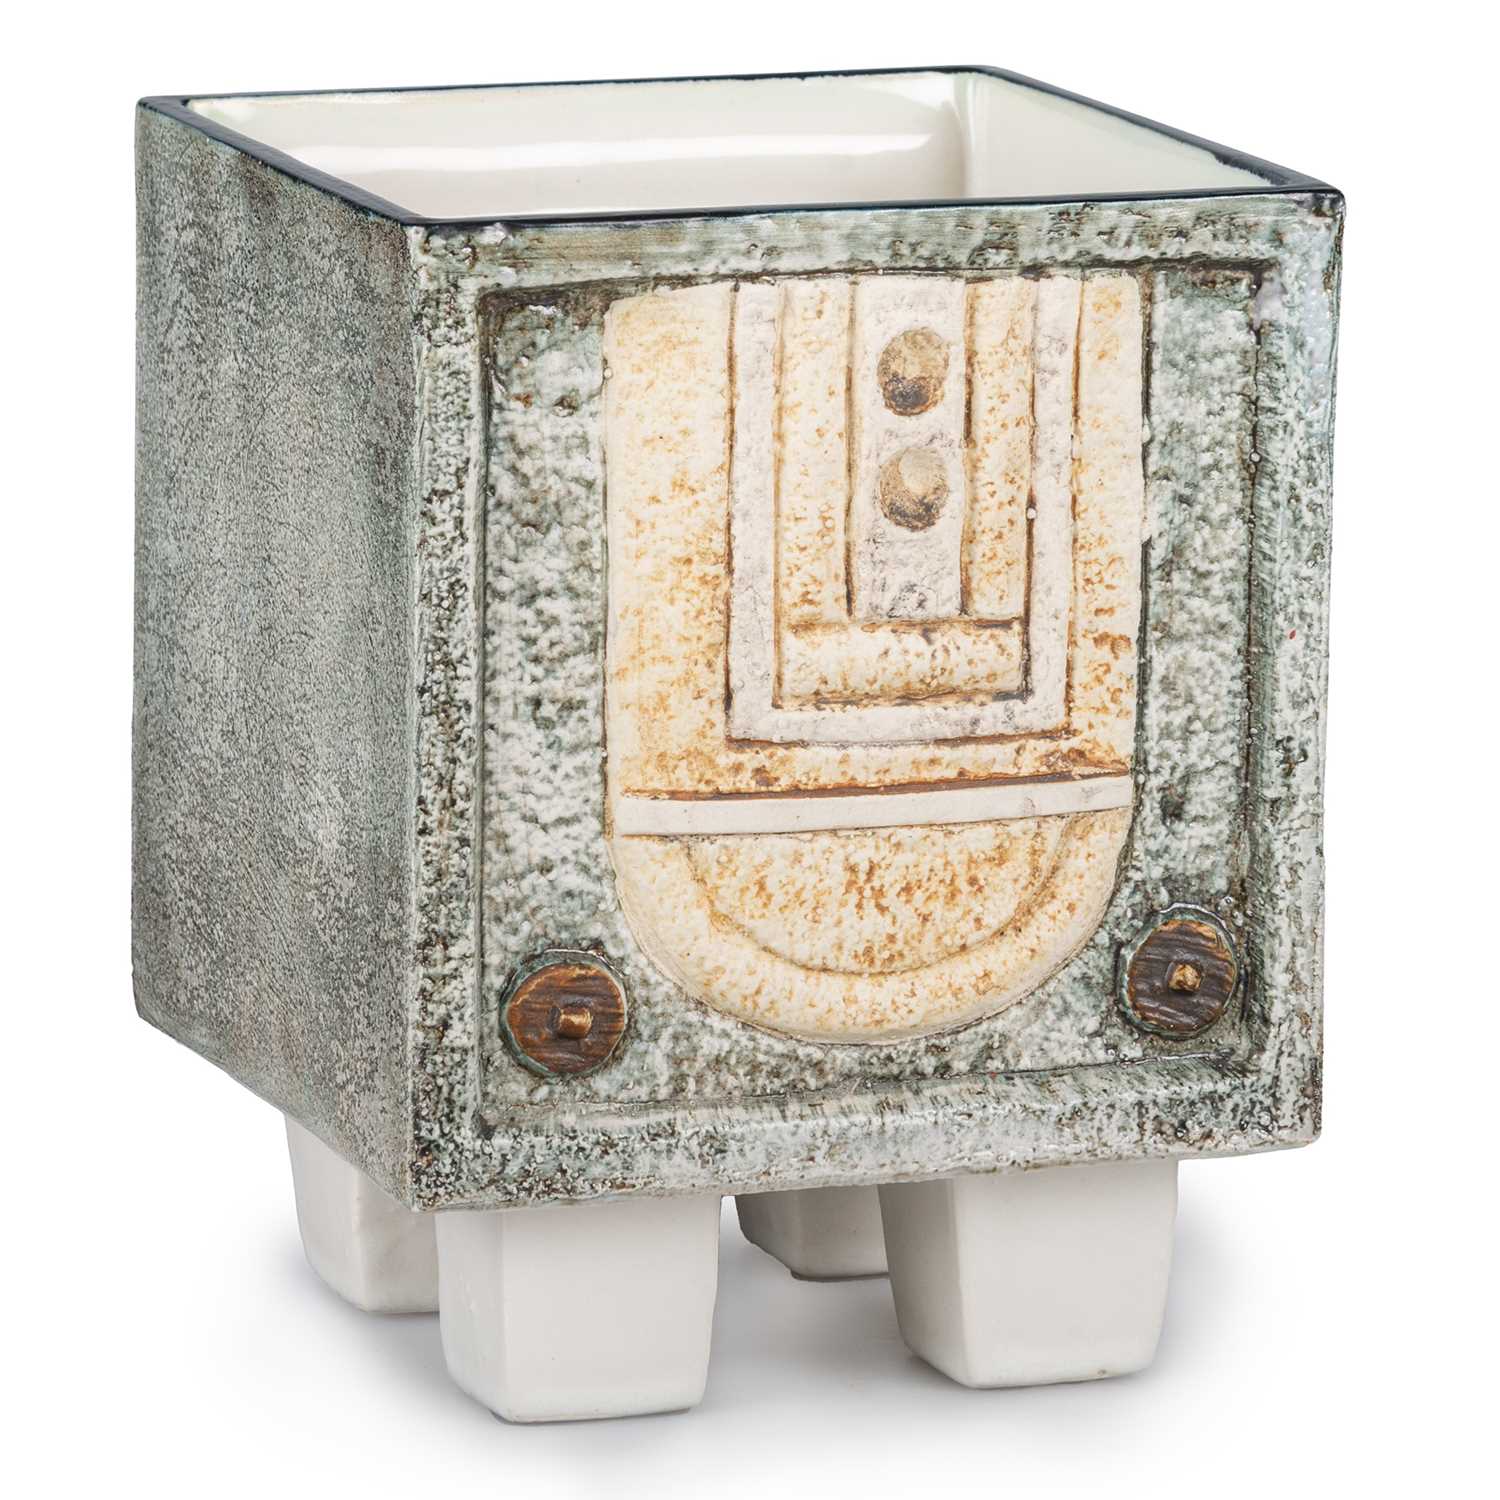 ANNE JONES FOR TROIKA POTTERY, A LARGE FOOTED CUBE PLANTER - Image 2 of 3